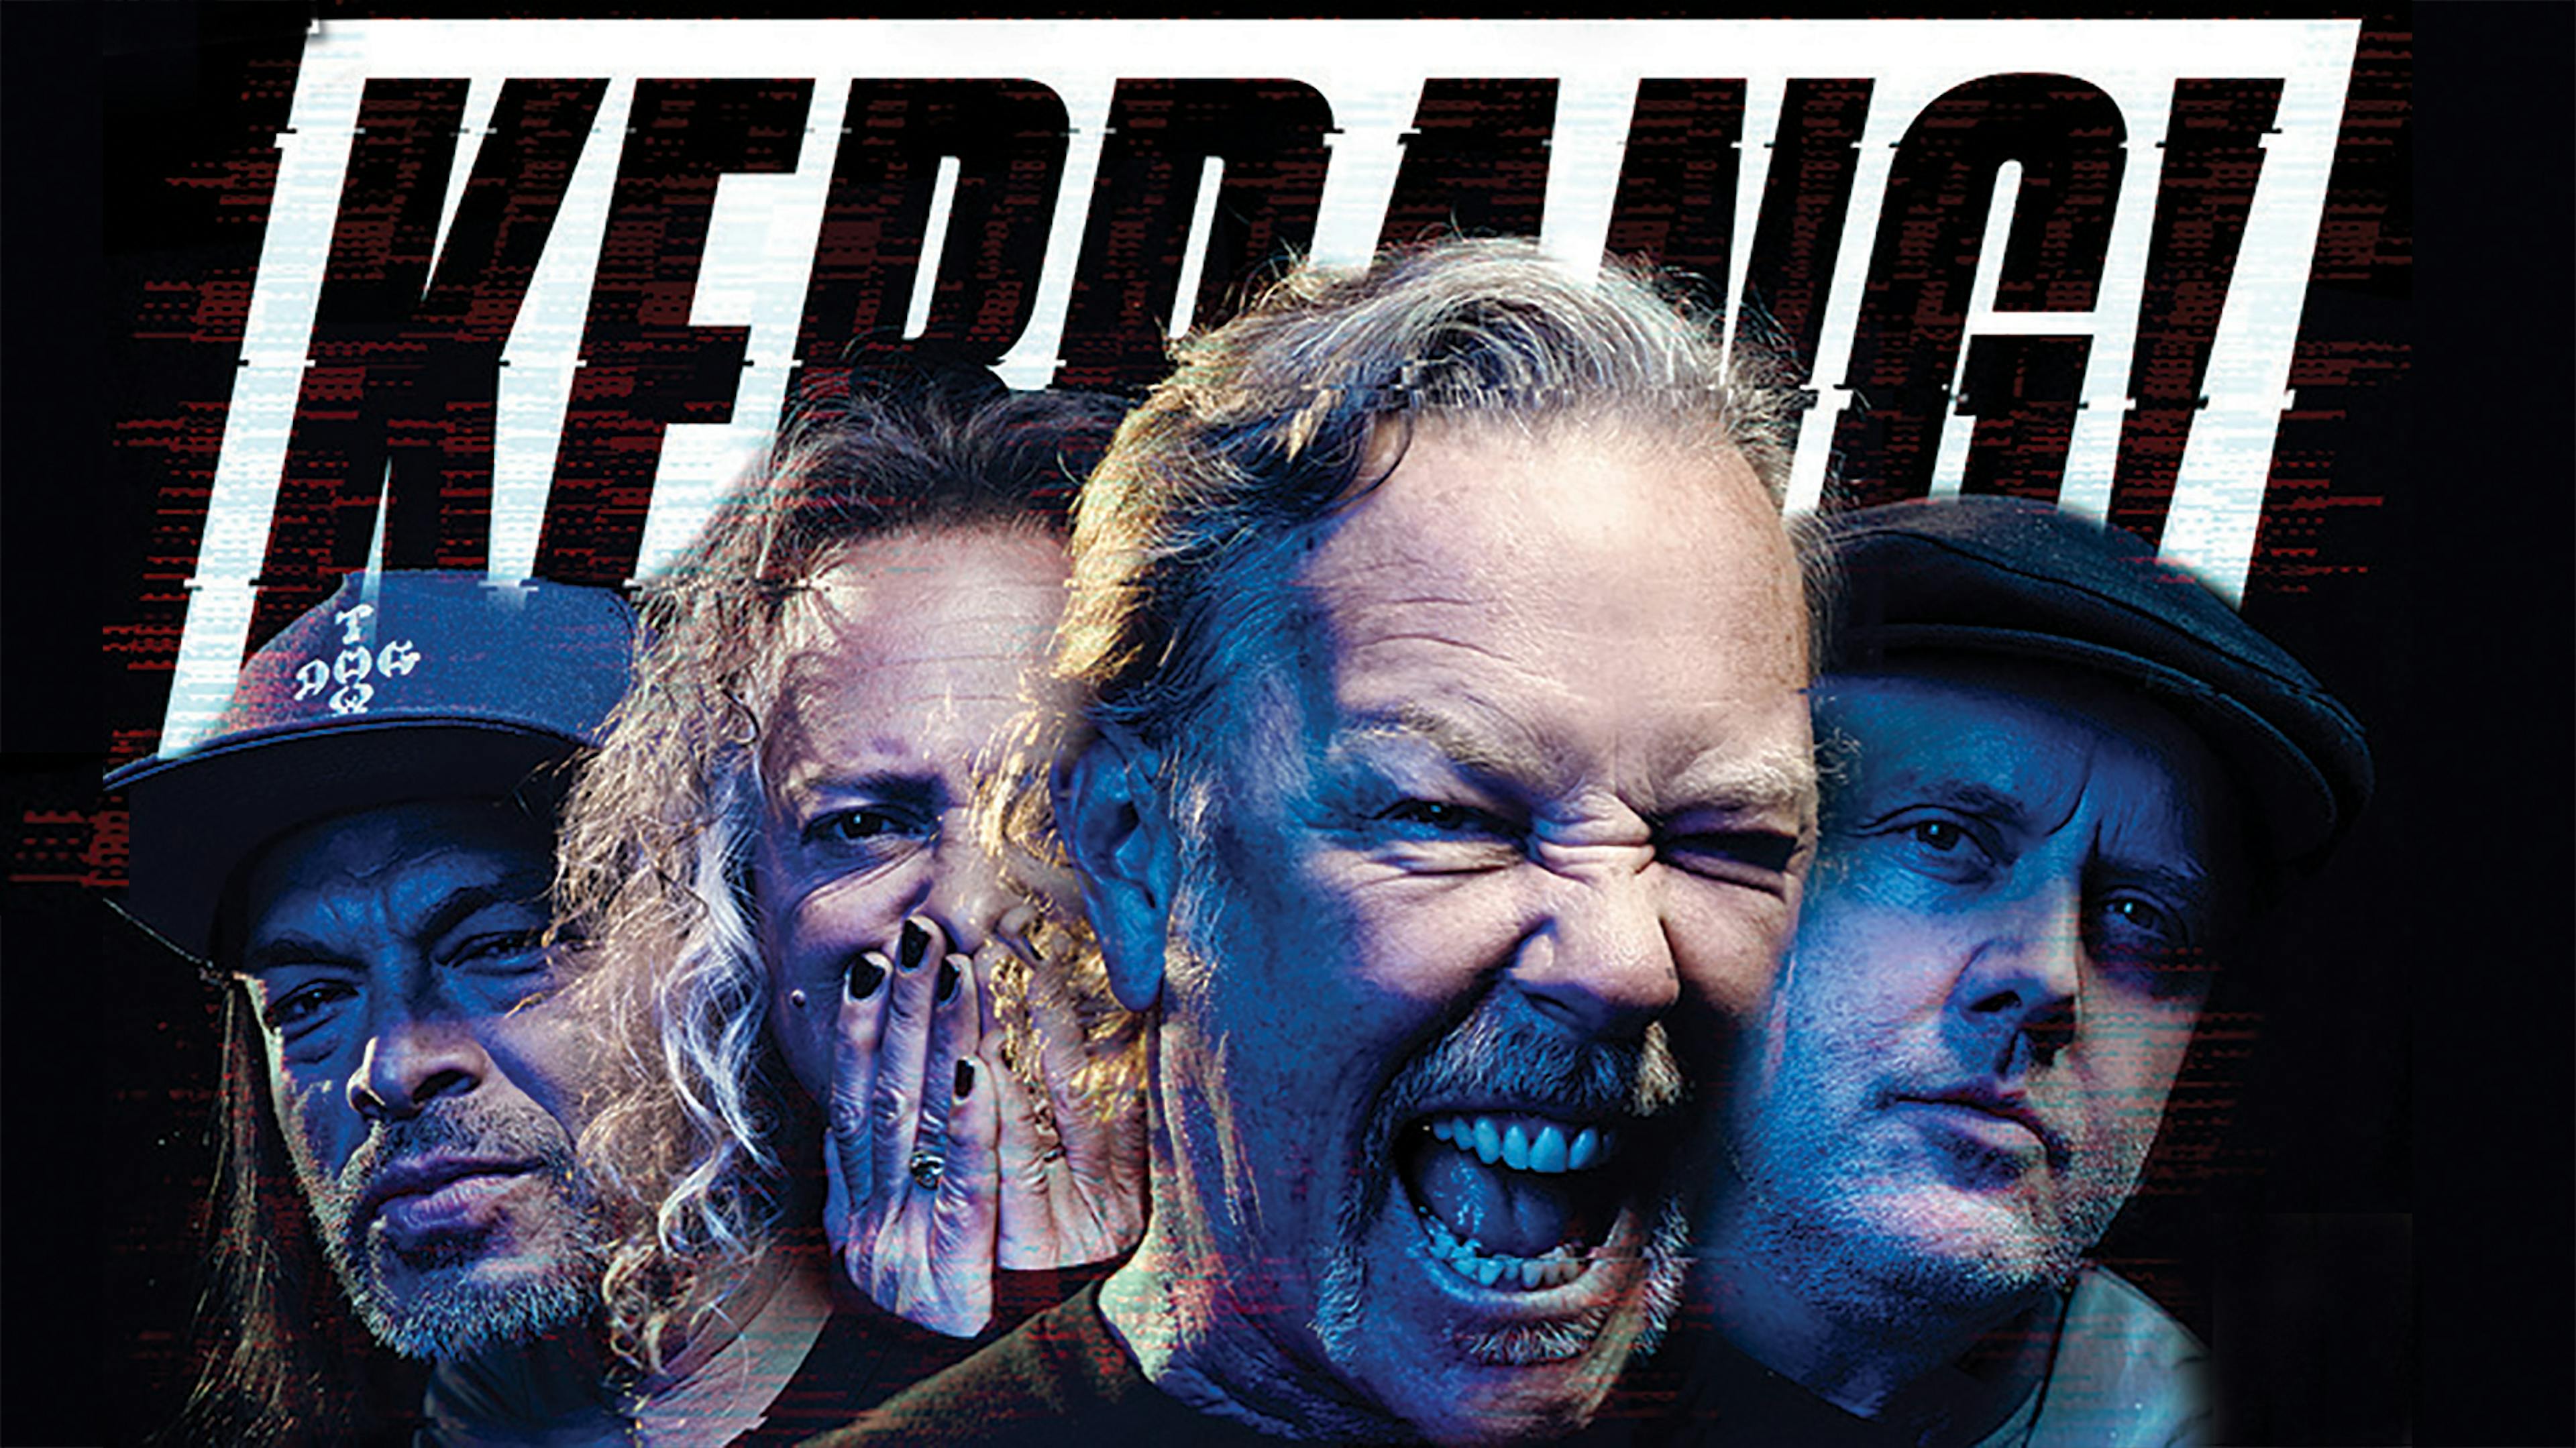 The People Vs. Metallica: The Four Horsemen Face Your Burning Questions!